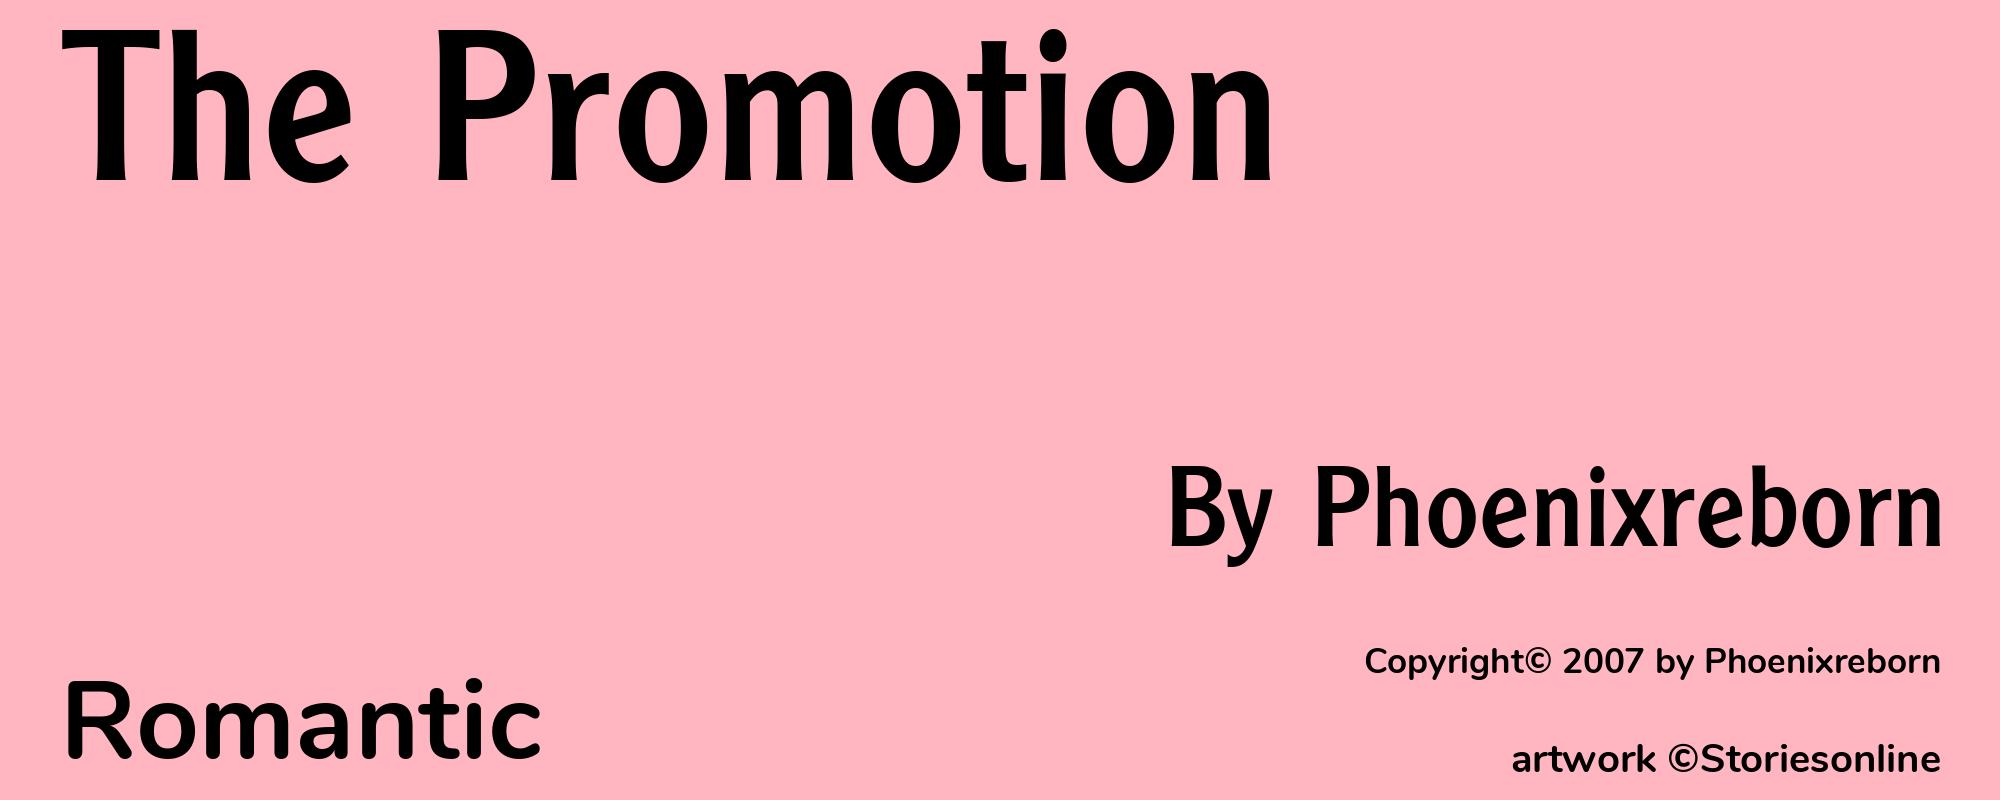 The Promotion - Cover